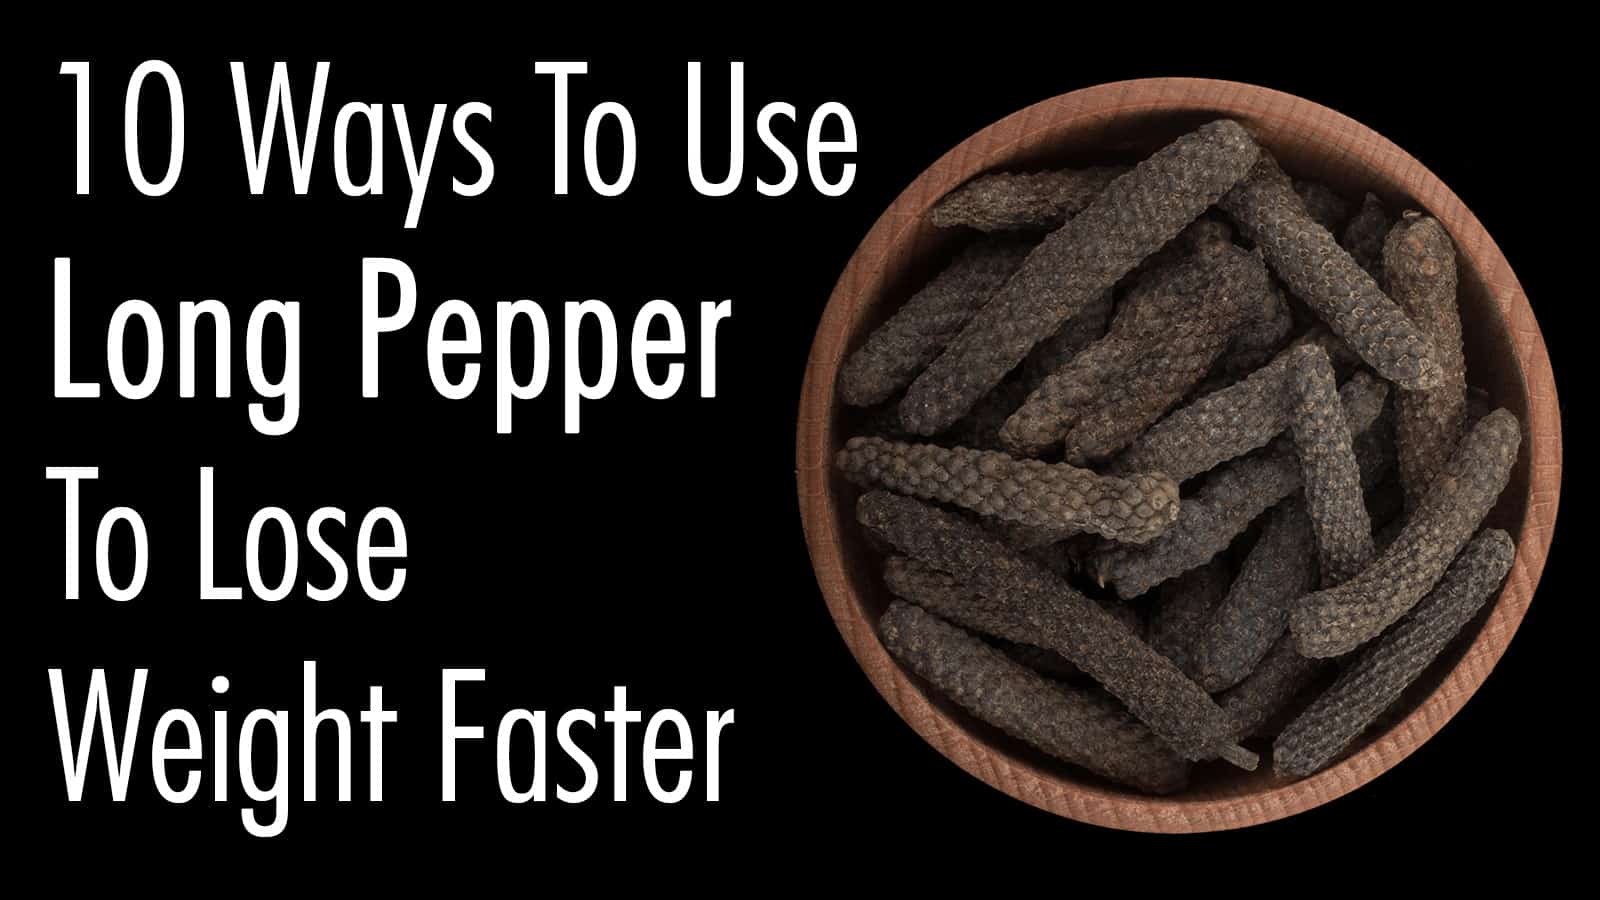 10 Ways To Use Long Pepper To Lose Weight Faster